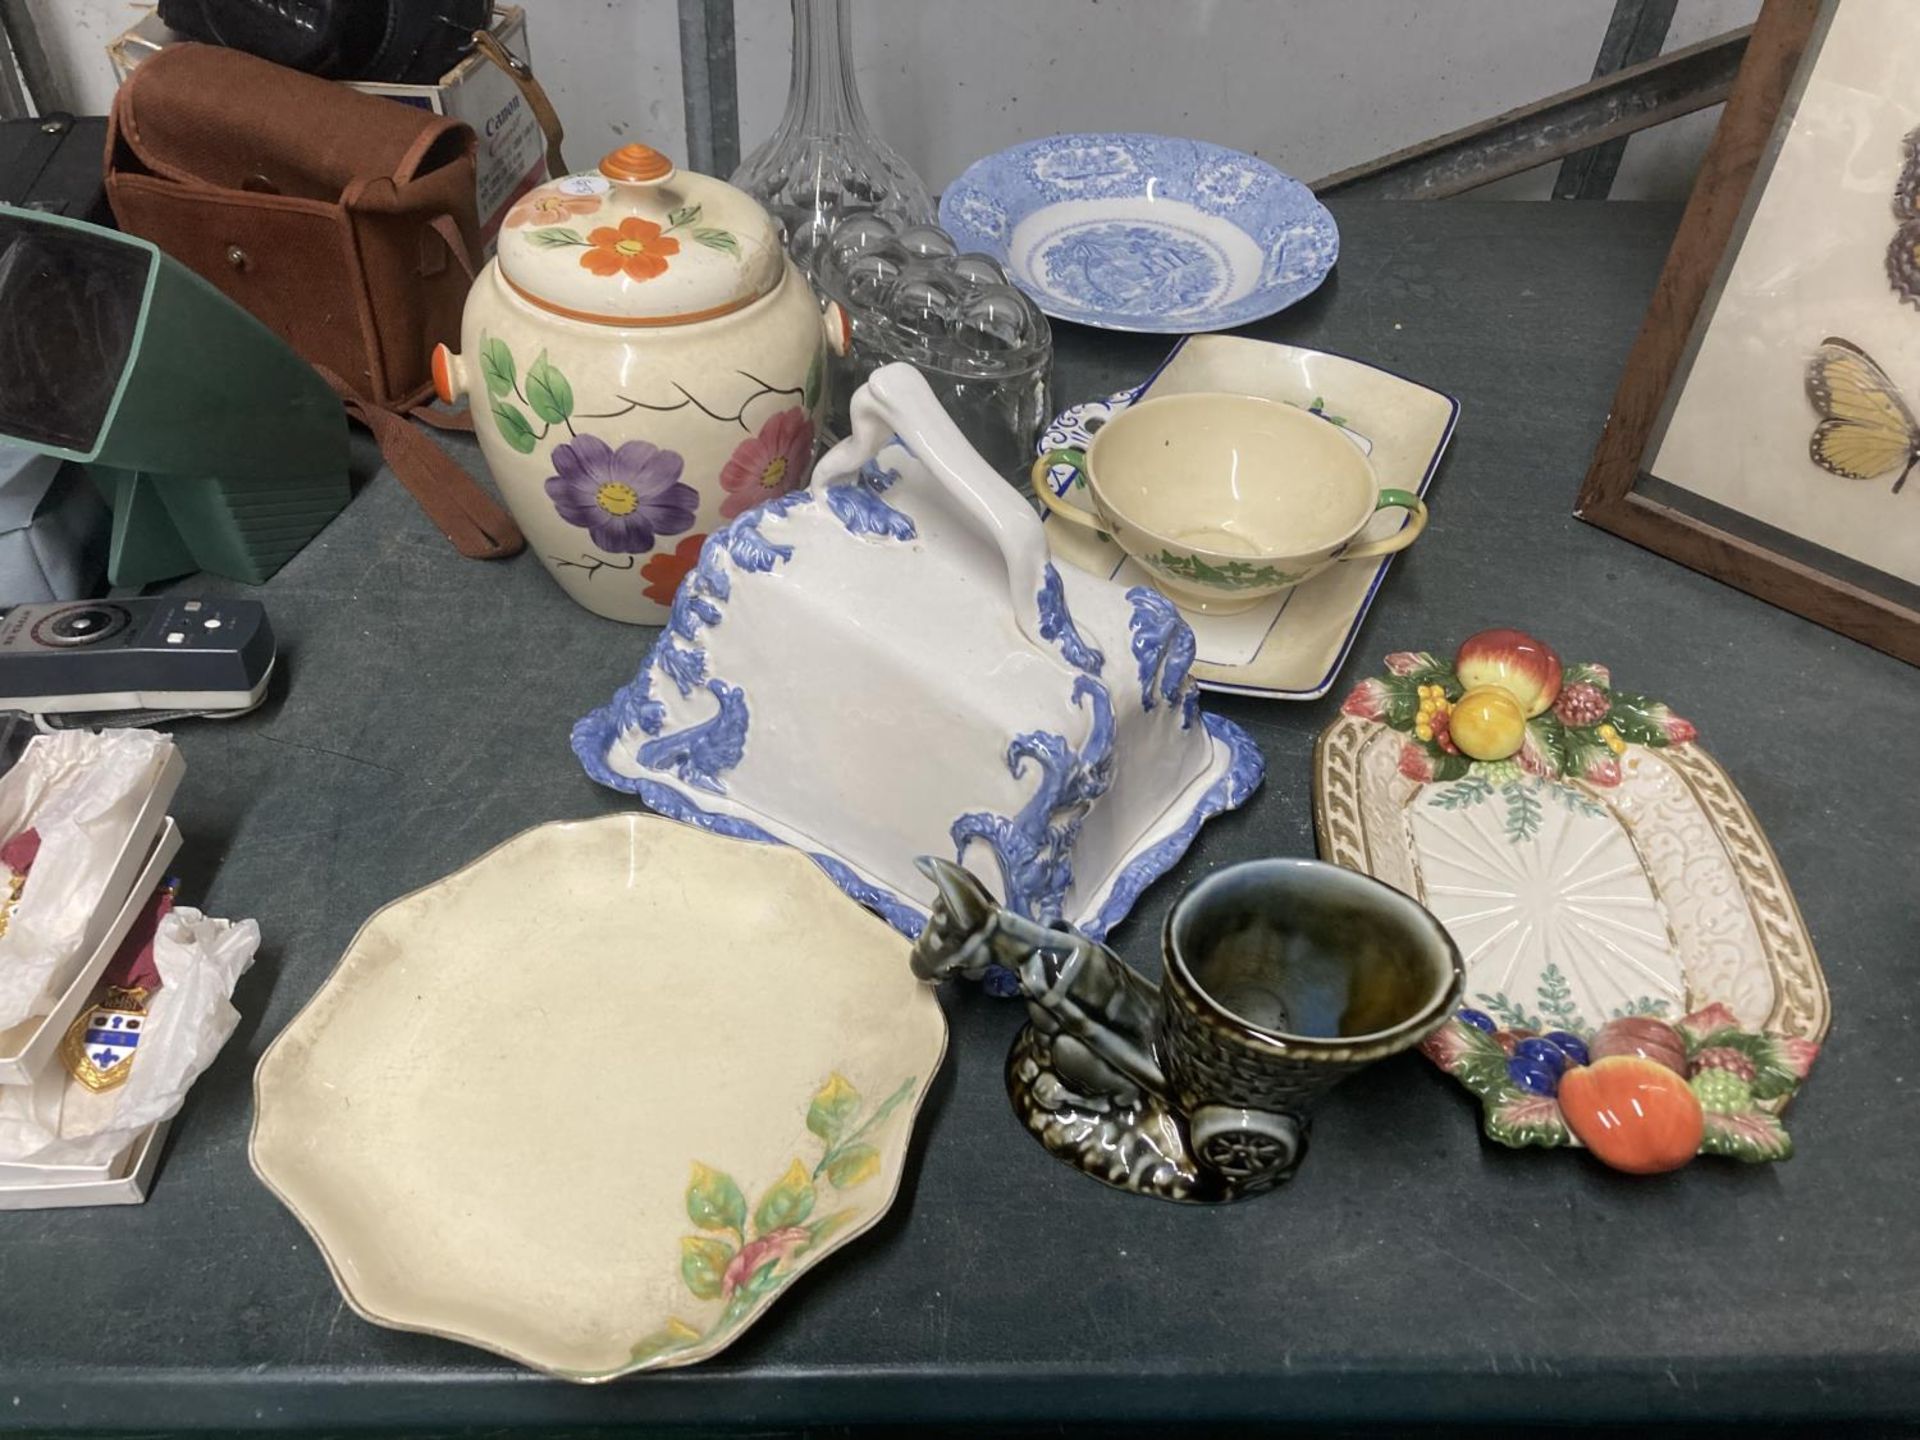 A MIXED LOT TO INCLUDE A GLASS DECANTER AND JELLY MOULD, VINTAGE CERAMIC CHEESE DOME, PLATES, LIDDED